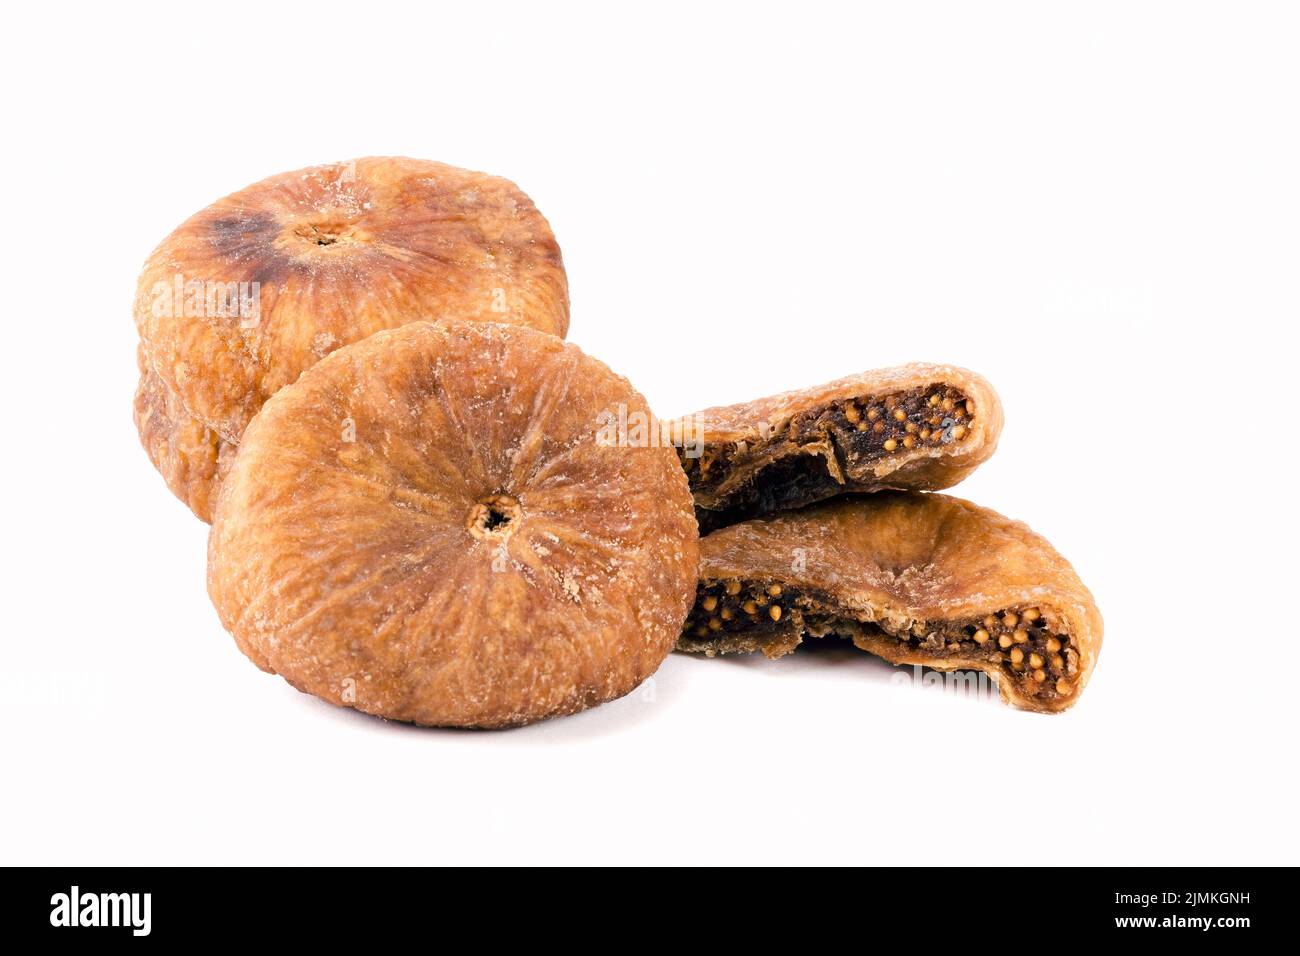 Delicious fruits of dried fig isolated on white background. Close up view. Stock Photo